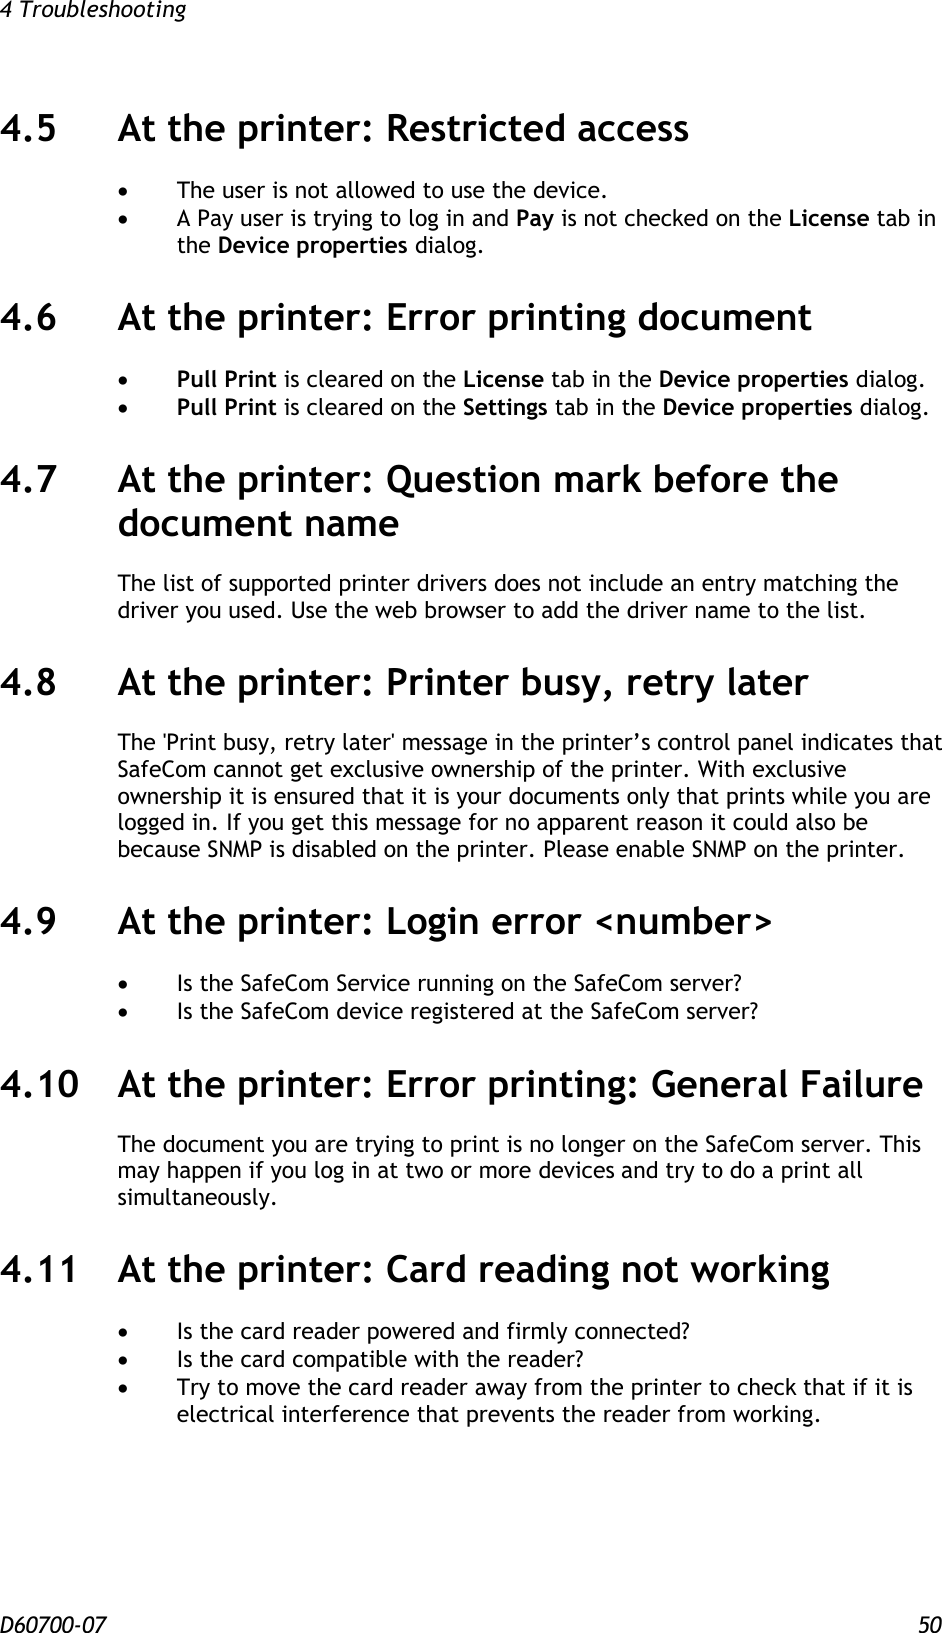 4 Troubleshooting  D60700-07 50 4.5 At the printer: Restricted access   The user is not allowed to use the device.  A Pay user is trying to log in and Pay is not checked on the License tab in the Device properties dialog. 4.6 At the printer: Error printing document   Pull Print is cleared on the License tab in the Device properties dialog.  Pull Print is cleared on the Settings tab in the Device properties dialog. 4.7 At the printer: Question mark before the document name The list of supported printer drivers does not include an entry matching the driver you used. Use the web browser to add the driver name to the list. 4.8 At the printer: Printer busy, retry later The &apos;Print busy, retry later&apos; message in the printer’s control panel indicates that SafeCom cannot get exclusive ownership of the printer. With exclusive ownership it is ensured that it is your documents only that prints while you are logged in. If you get this message for no apparent reason it could also be because SNMP is disabled on the printer. Please enable SNMP on the printer. 4.9 At the printer: Login error &lt;number&gt;  Is the SafeCom Service running on the SafeCom server?  Is the SafeCom device registered at the SafeCom server? 4.10 At the printer: Error printing: General Failure The document you are trying to print is no longer on the SafeCom server. This may happen if you log in at two or more devices and try to do a print all simultaneously. 4.11 At the printer: Card reading not working  Is the card reader powered and firmly connected?  Is the card compatible with the reader?  Try to move the card reader away from the printer to check that if it is electrical interference that prevents the reader from working. 